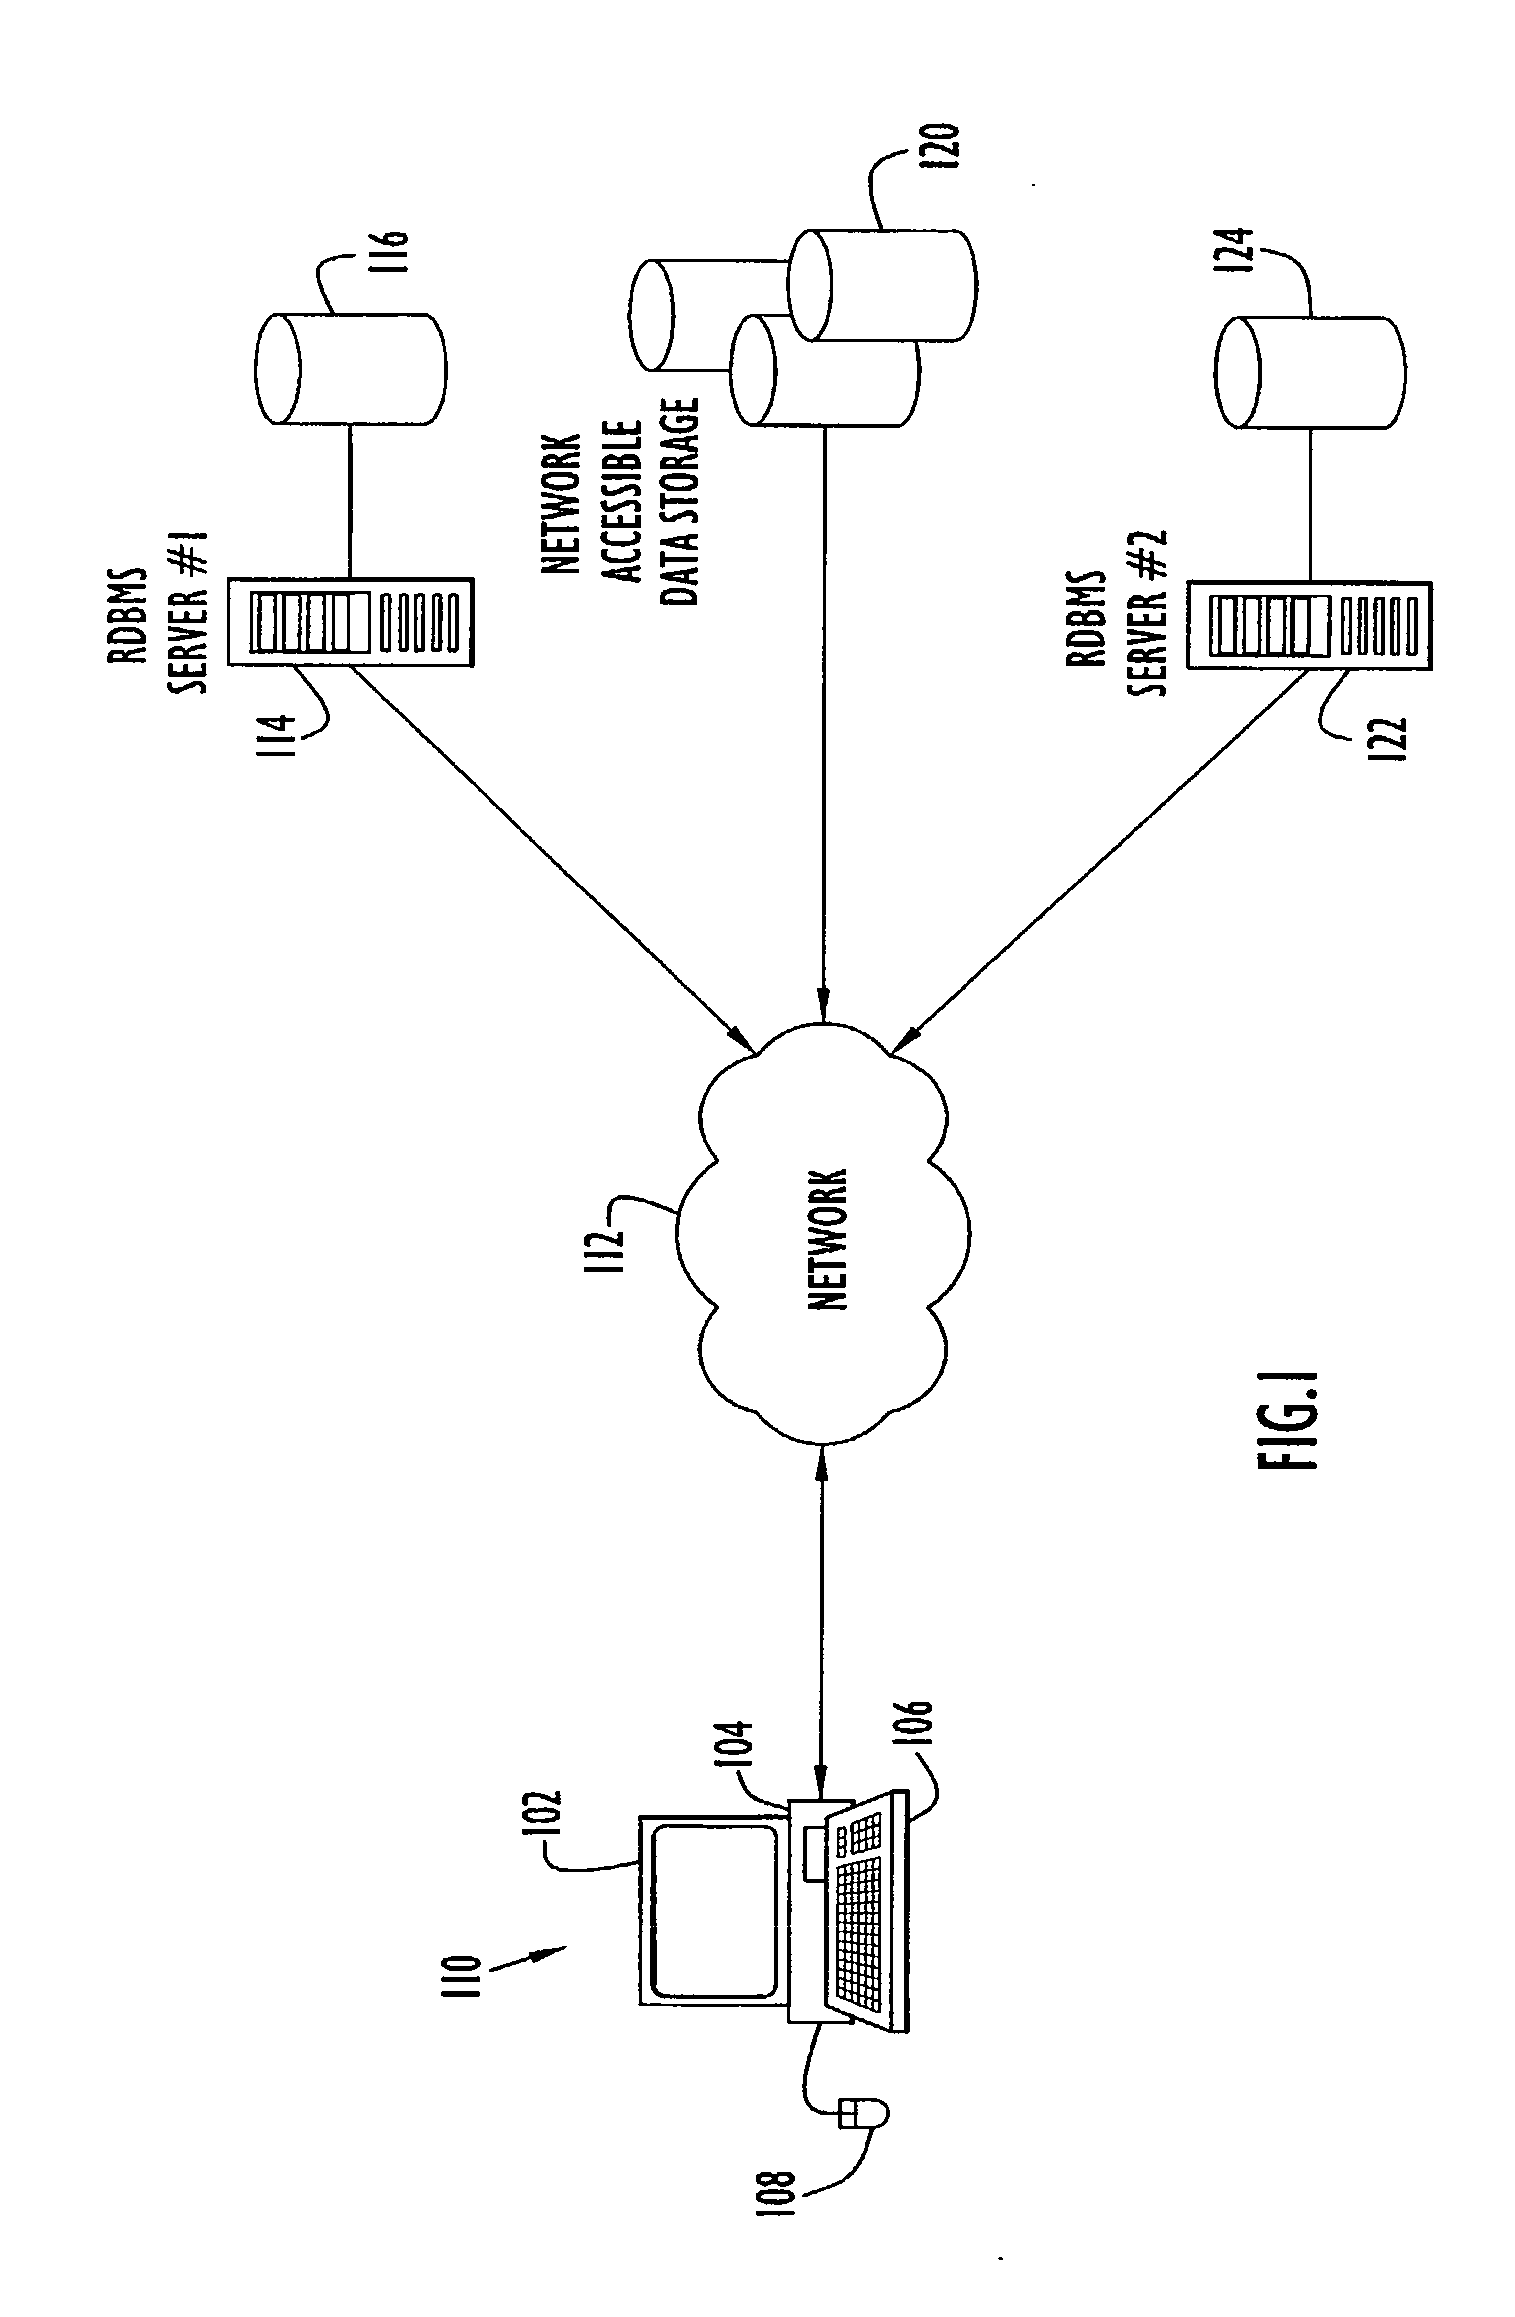 Method and apparatus for recording and managing data object relatonship data